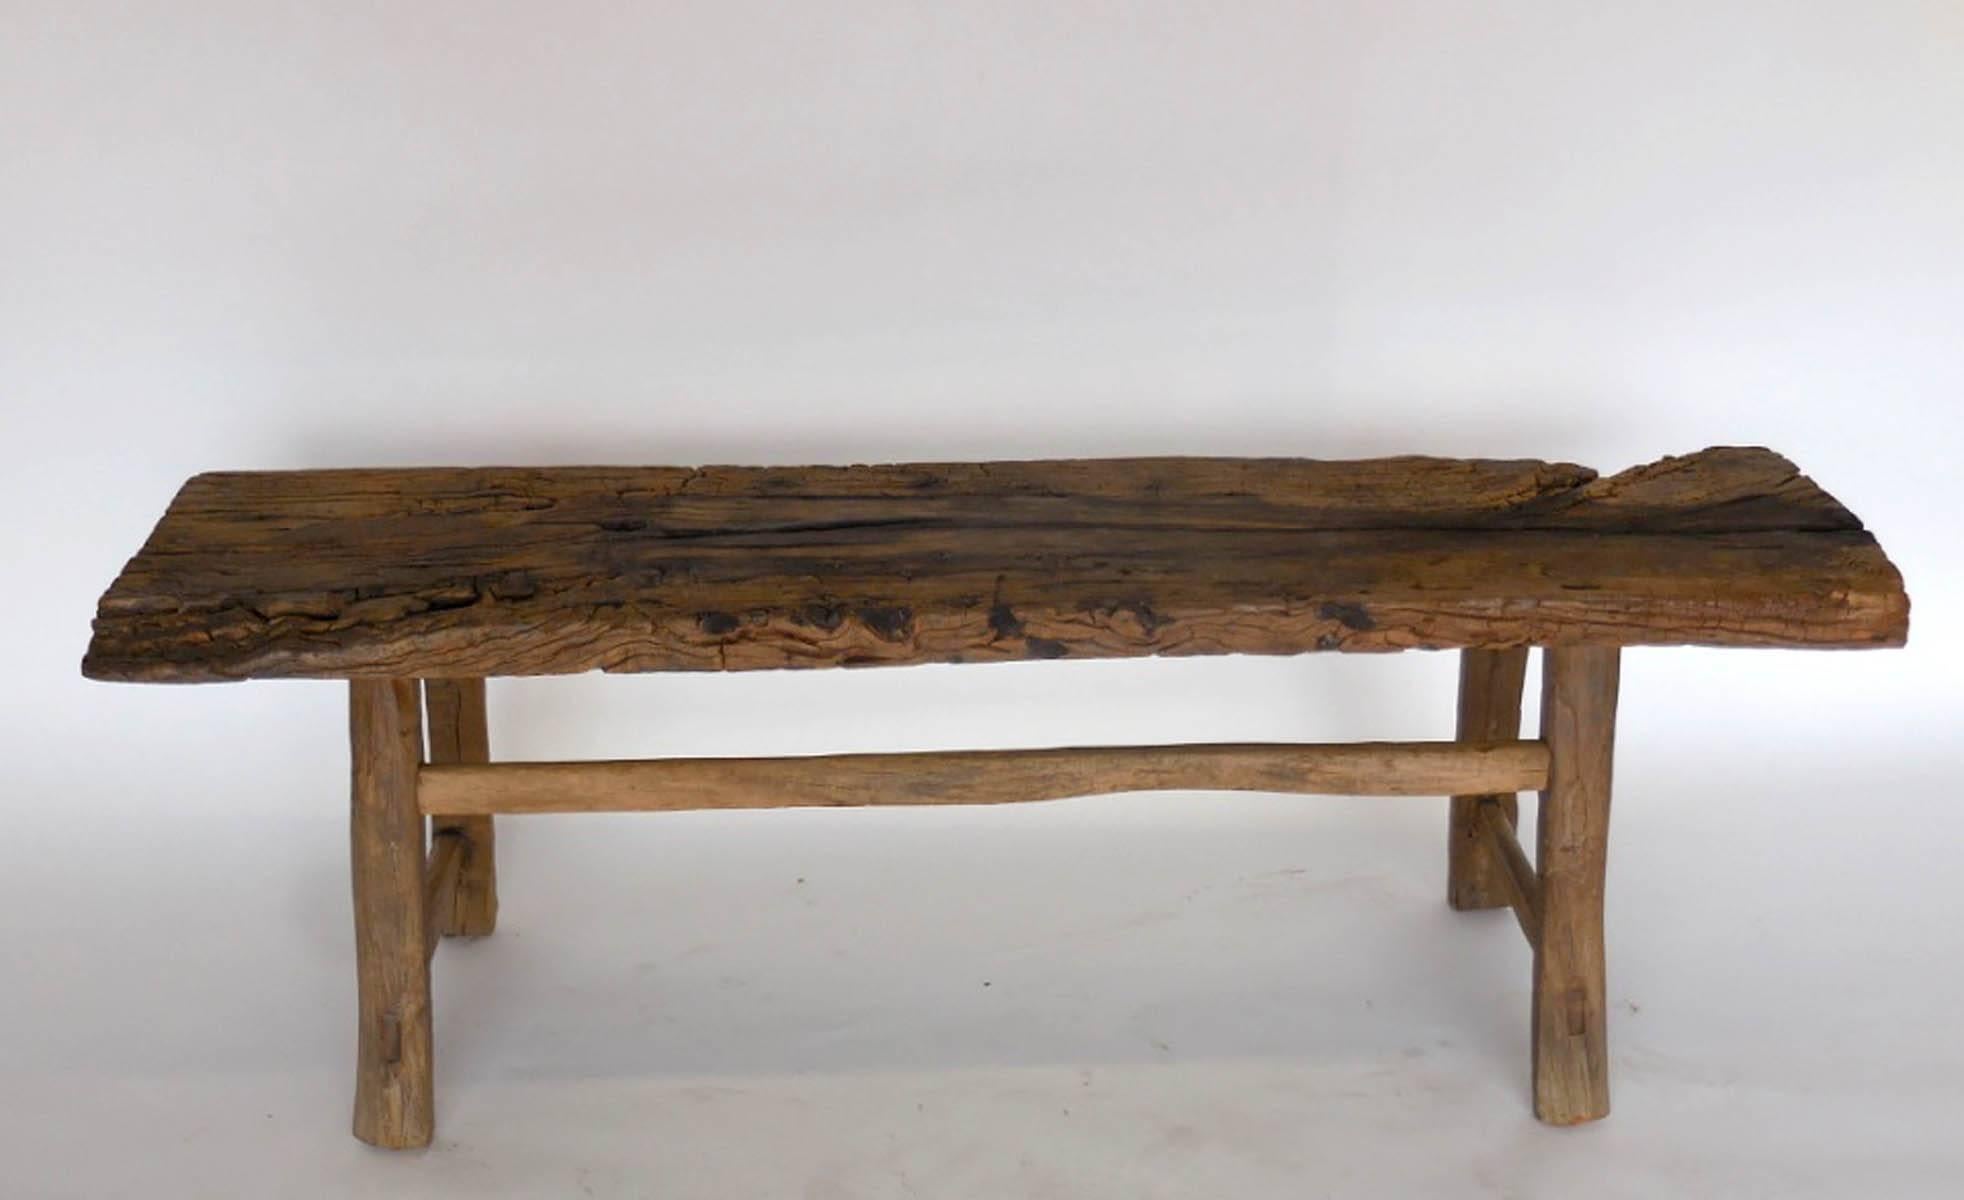 Early 19th century Chinese Chestnut bench with wonderful old wood and branch stretcher. Sturdy and functional. Mortise and tenon construction.